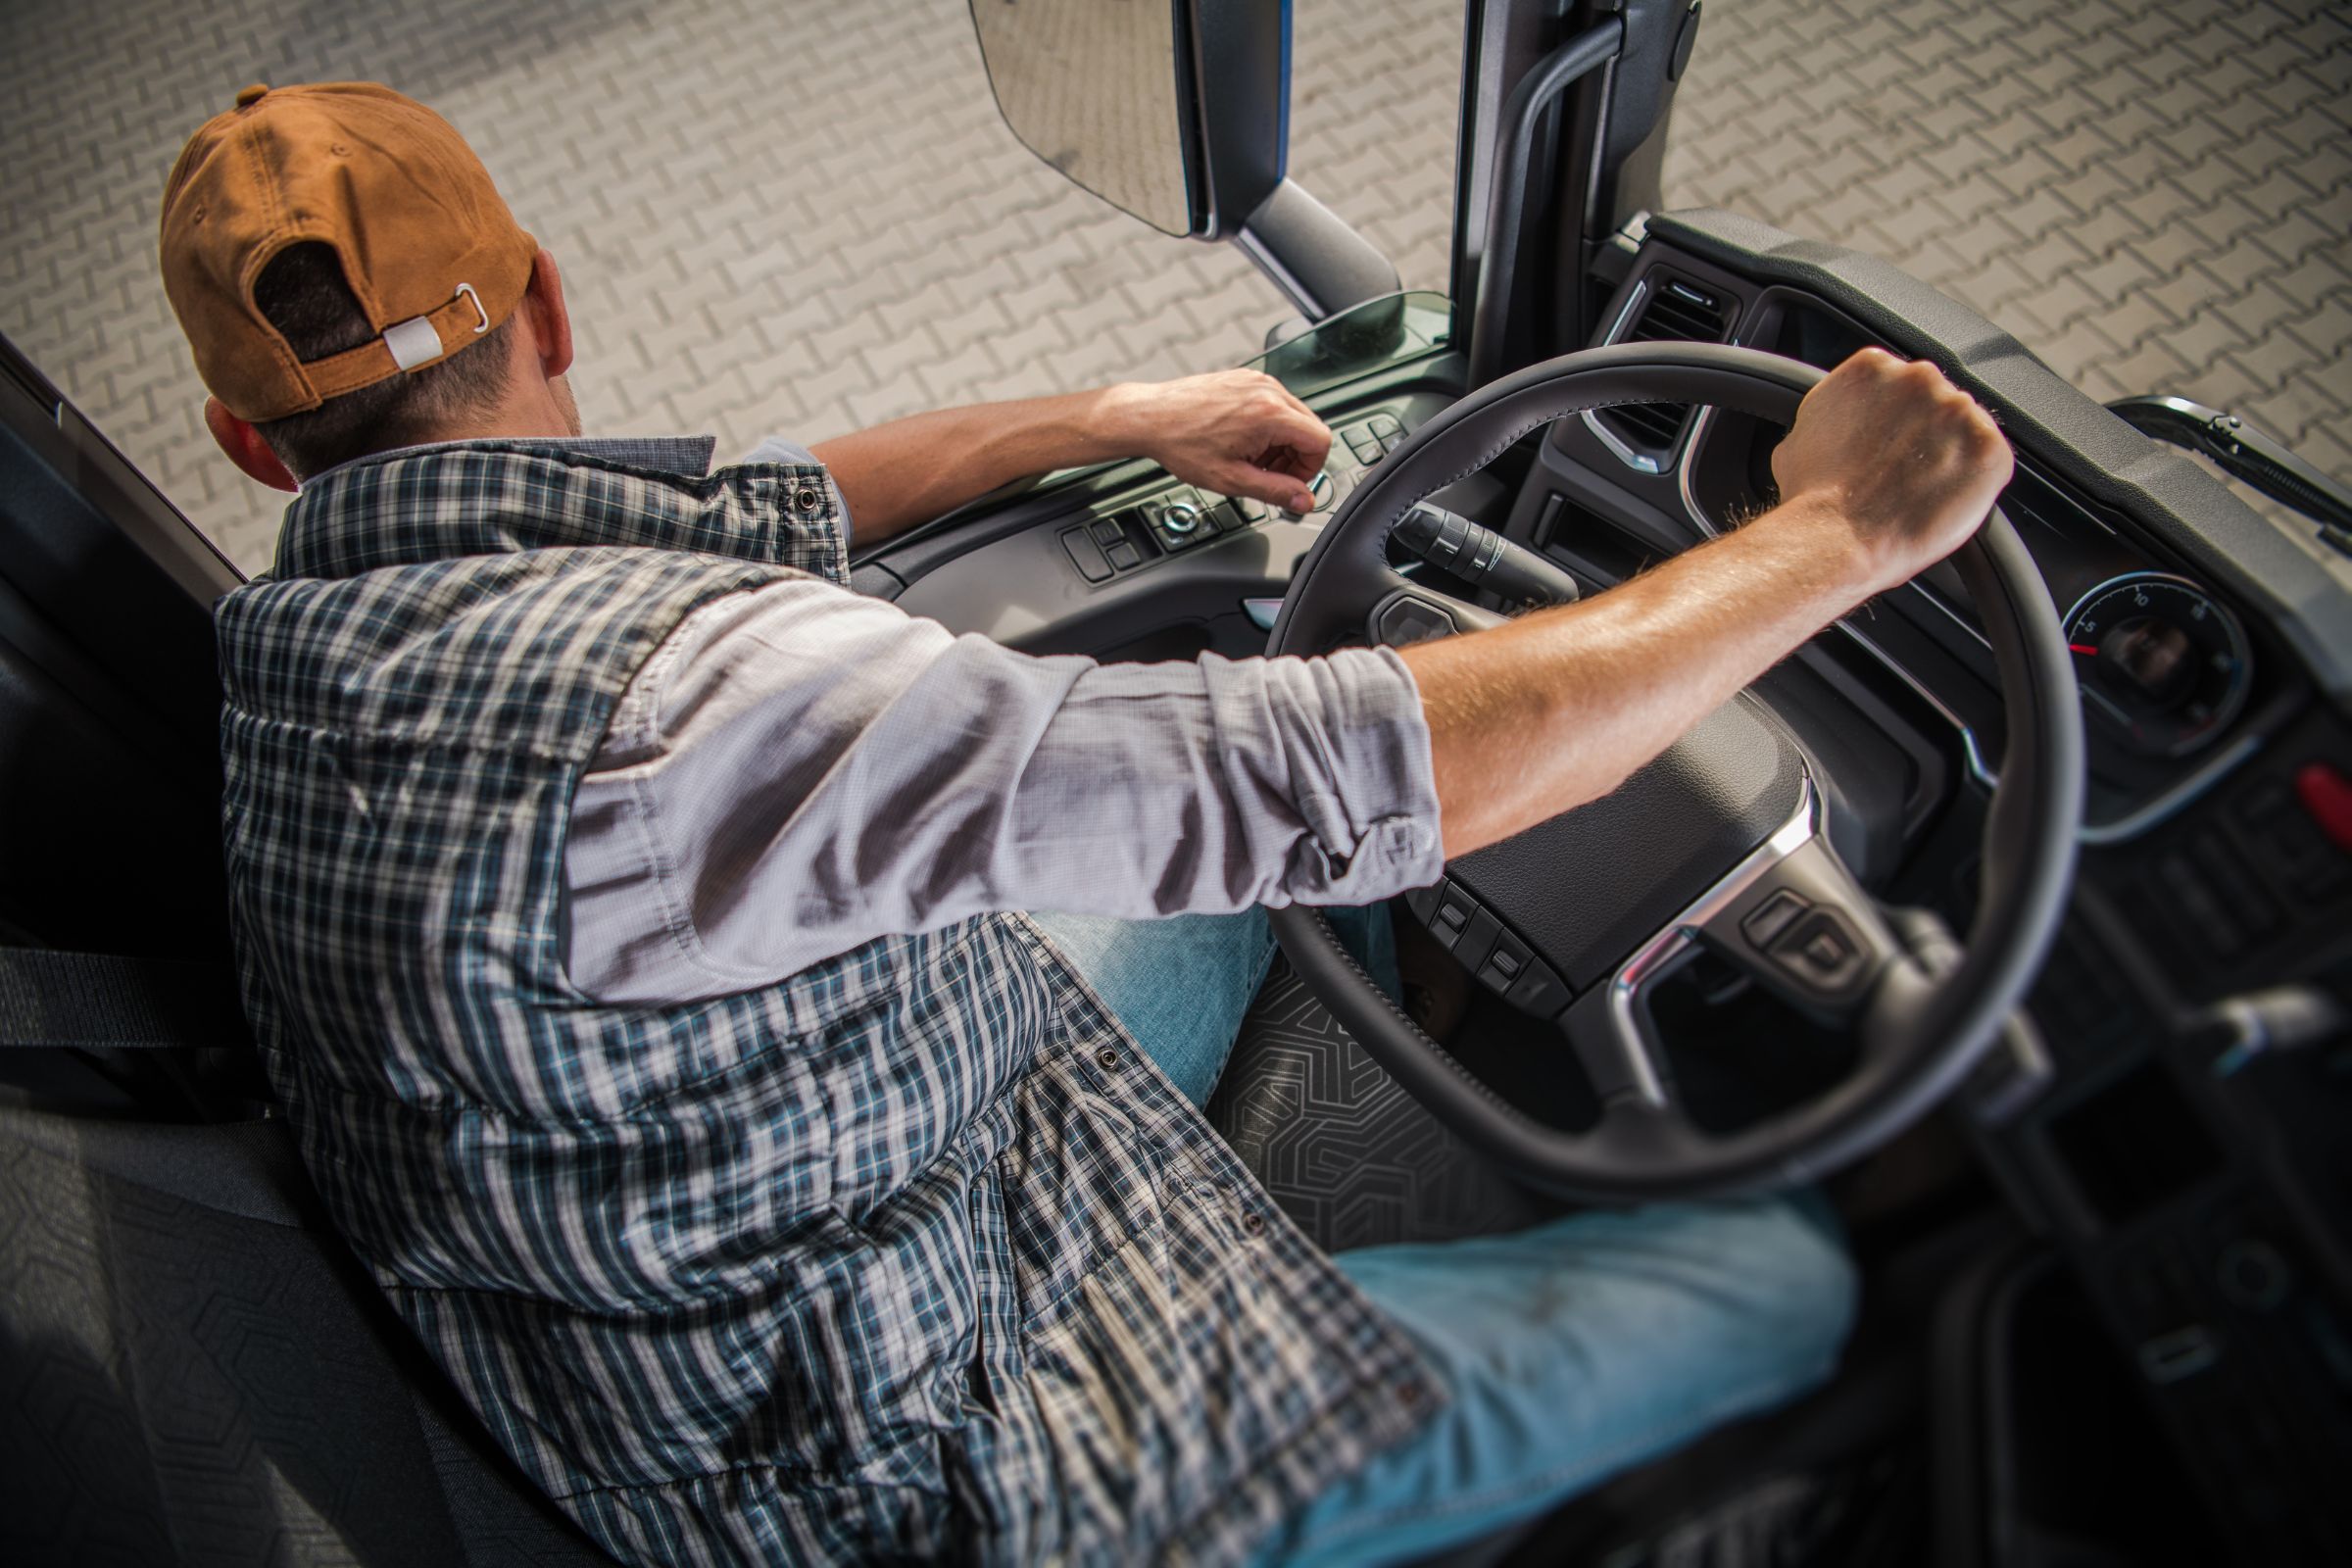 Behind the Wheel: What to Expect During CDL Training